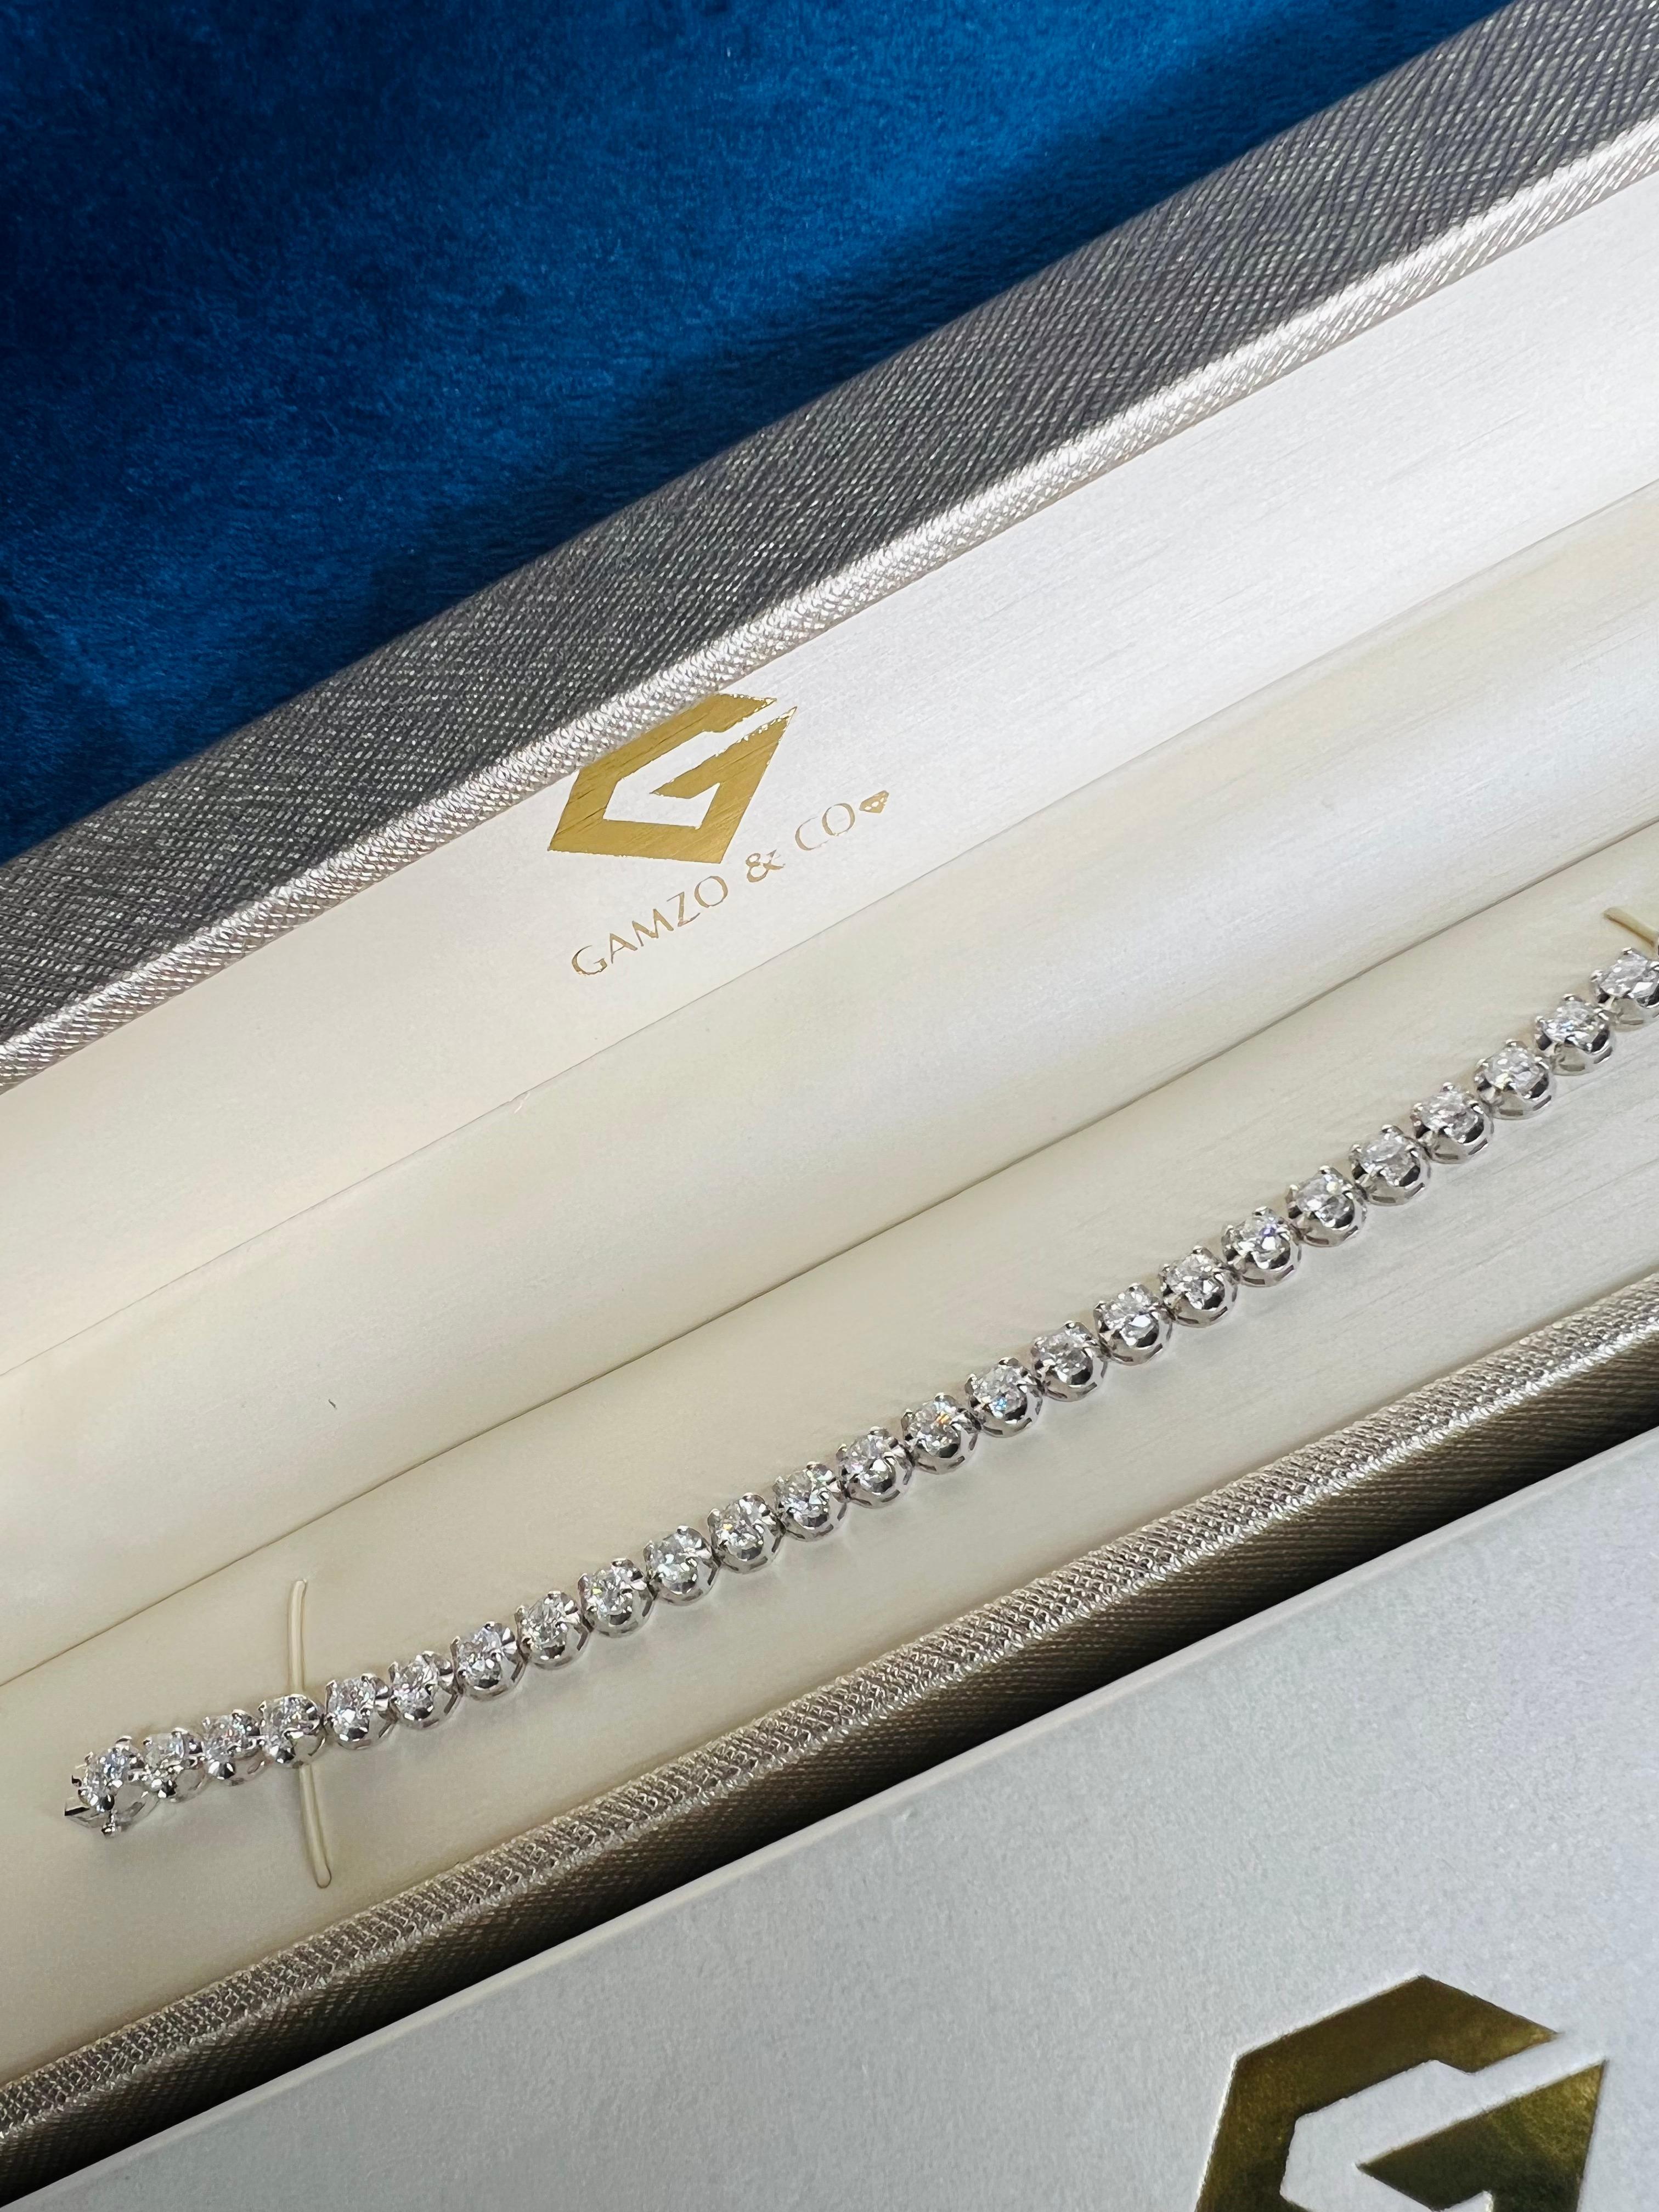 These beautiful round diamonds dance around your wrist as they absorb light and attention.
Metal: 14k Gold
Diamond Cut: Round
Diamond Total Carats: 6.5ct
Diamond Clarity: VS
Diamond Color: F
Color: White Gold
Bracelet Length: 5.5 Inches 
Included